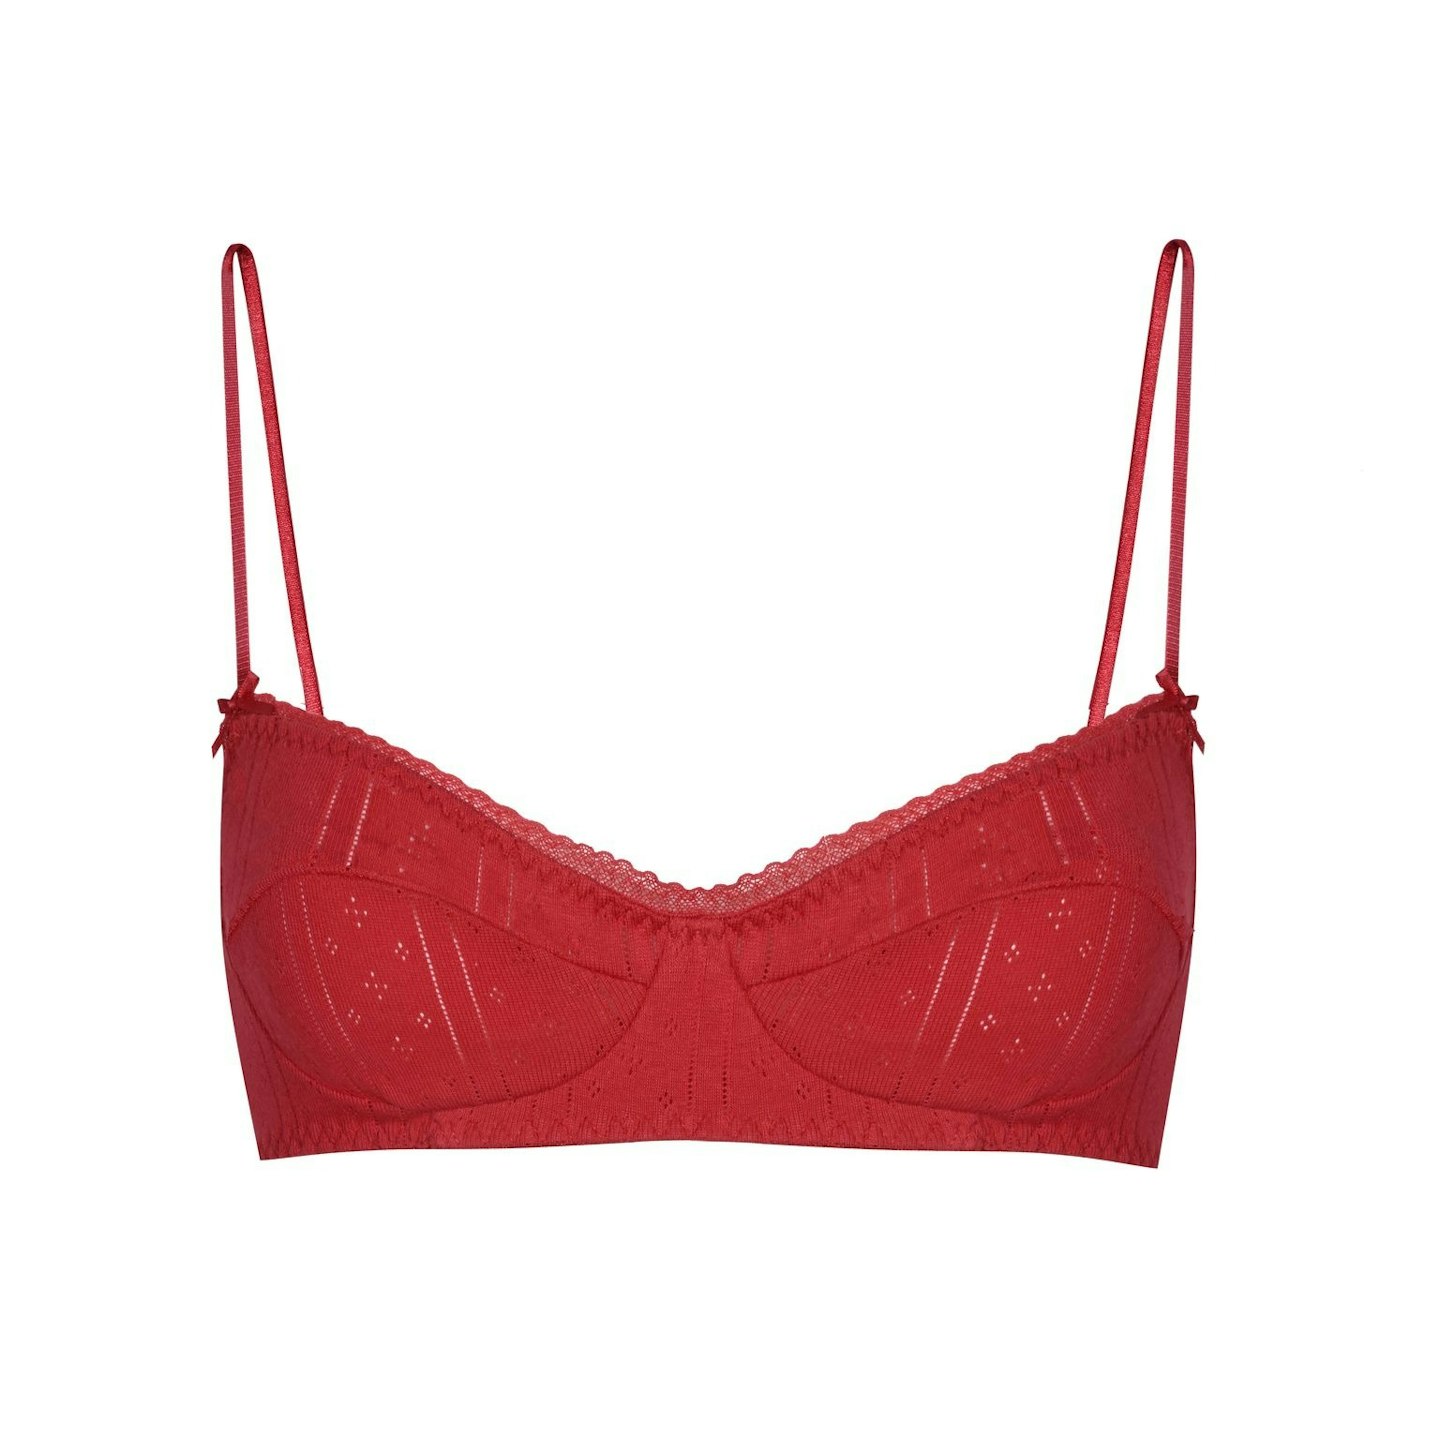 Made by Niki in The Independents '50 Best' Lingerie brands, Luxury  Lingerie